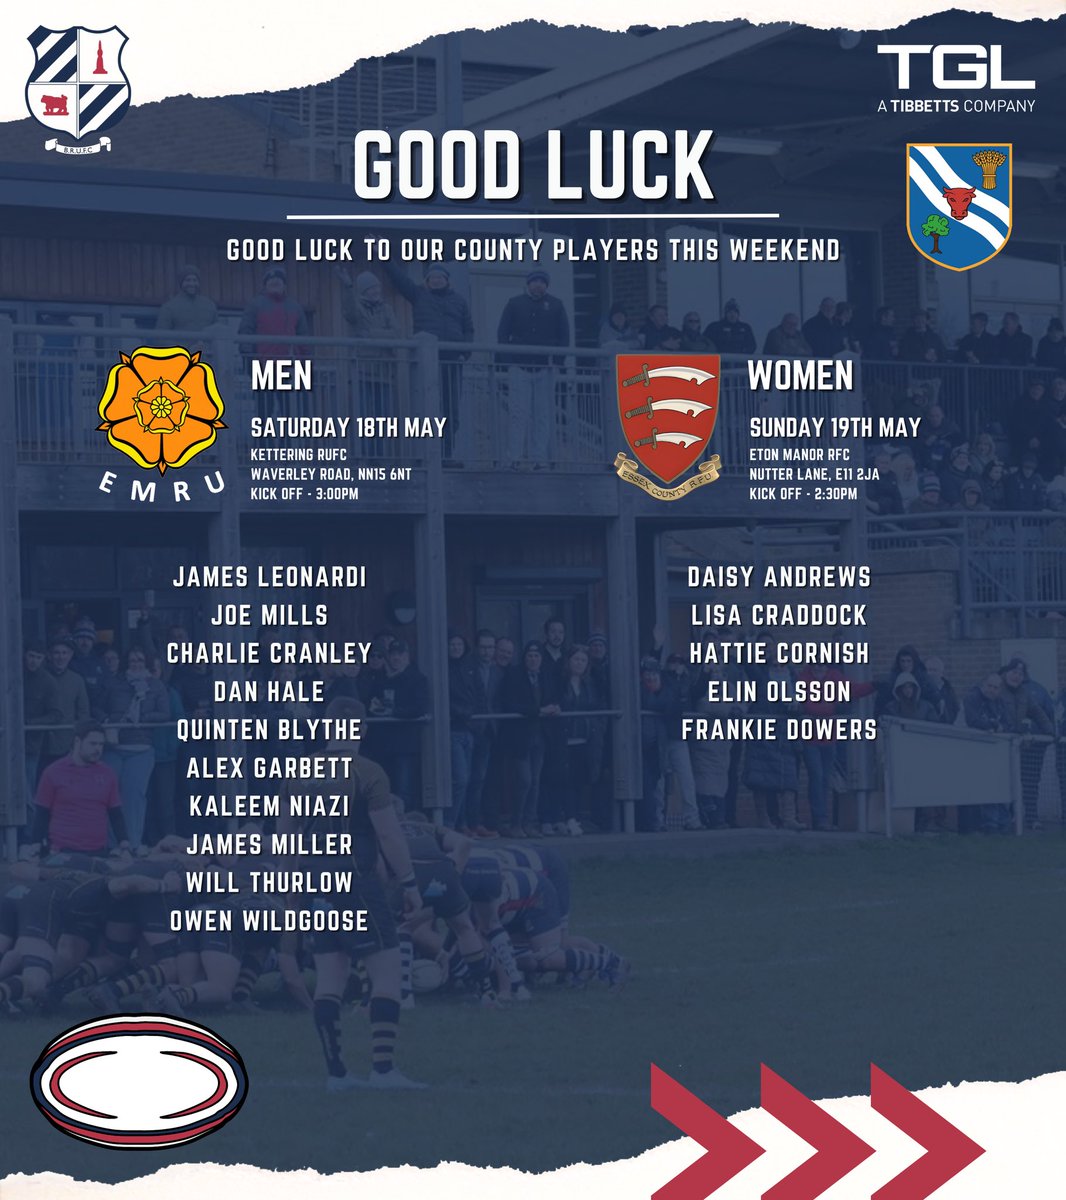 𝗚𝗢𝗢𝗗 𝗟𝗨𝗖𝗞 Good luck to our County players this weekend East Midlands RFU vs Oxfordshire RFU Saturday 18th May Essex RFU vs Oxfordshire RFU Sunday 19th May banburyrufc.com/news/good-luck… #BanburyRUFC #Rugby #Bulls 🐂